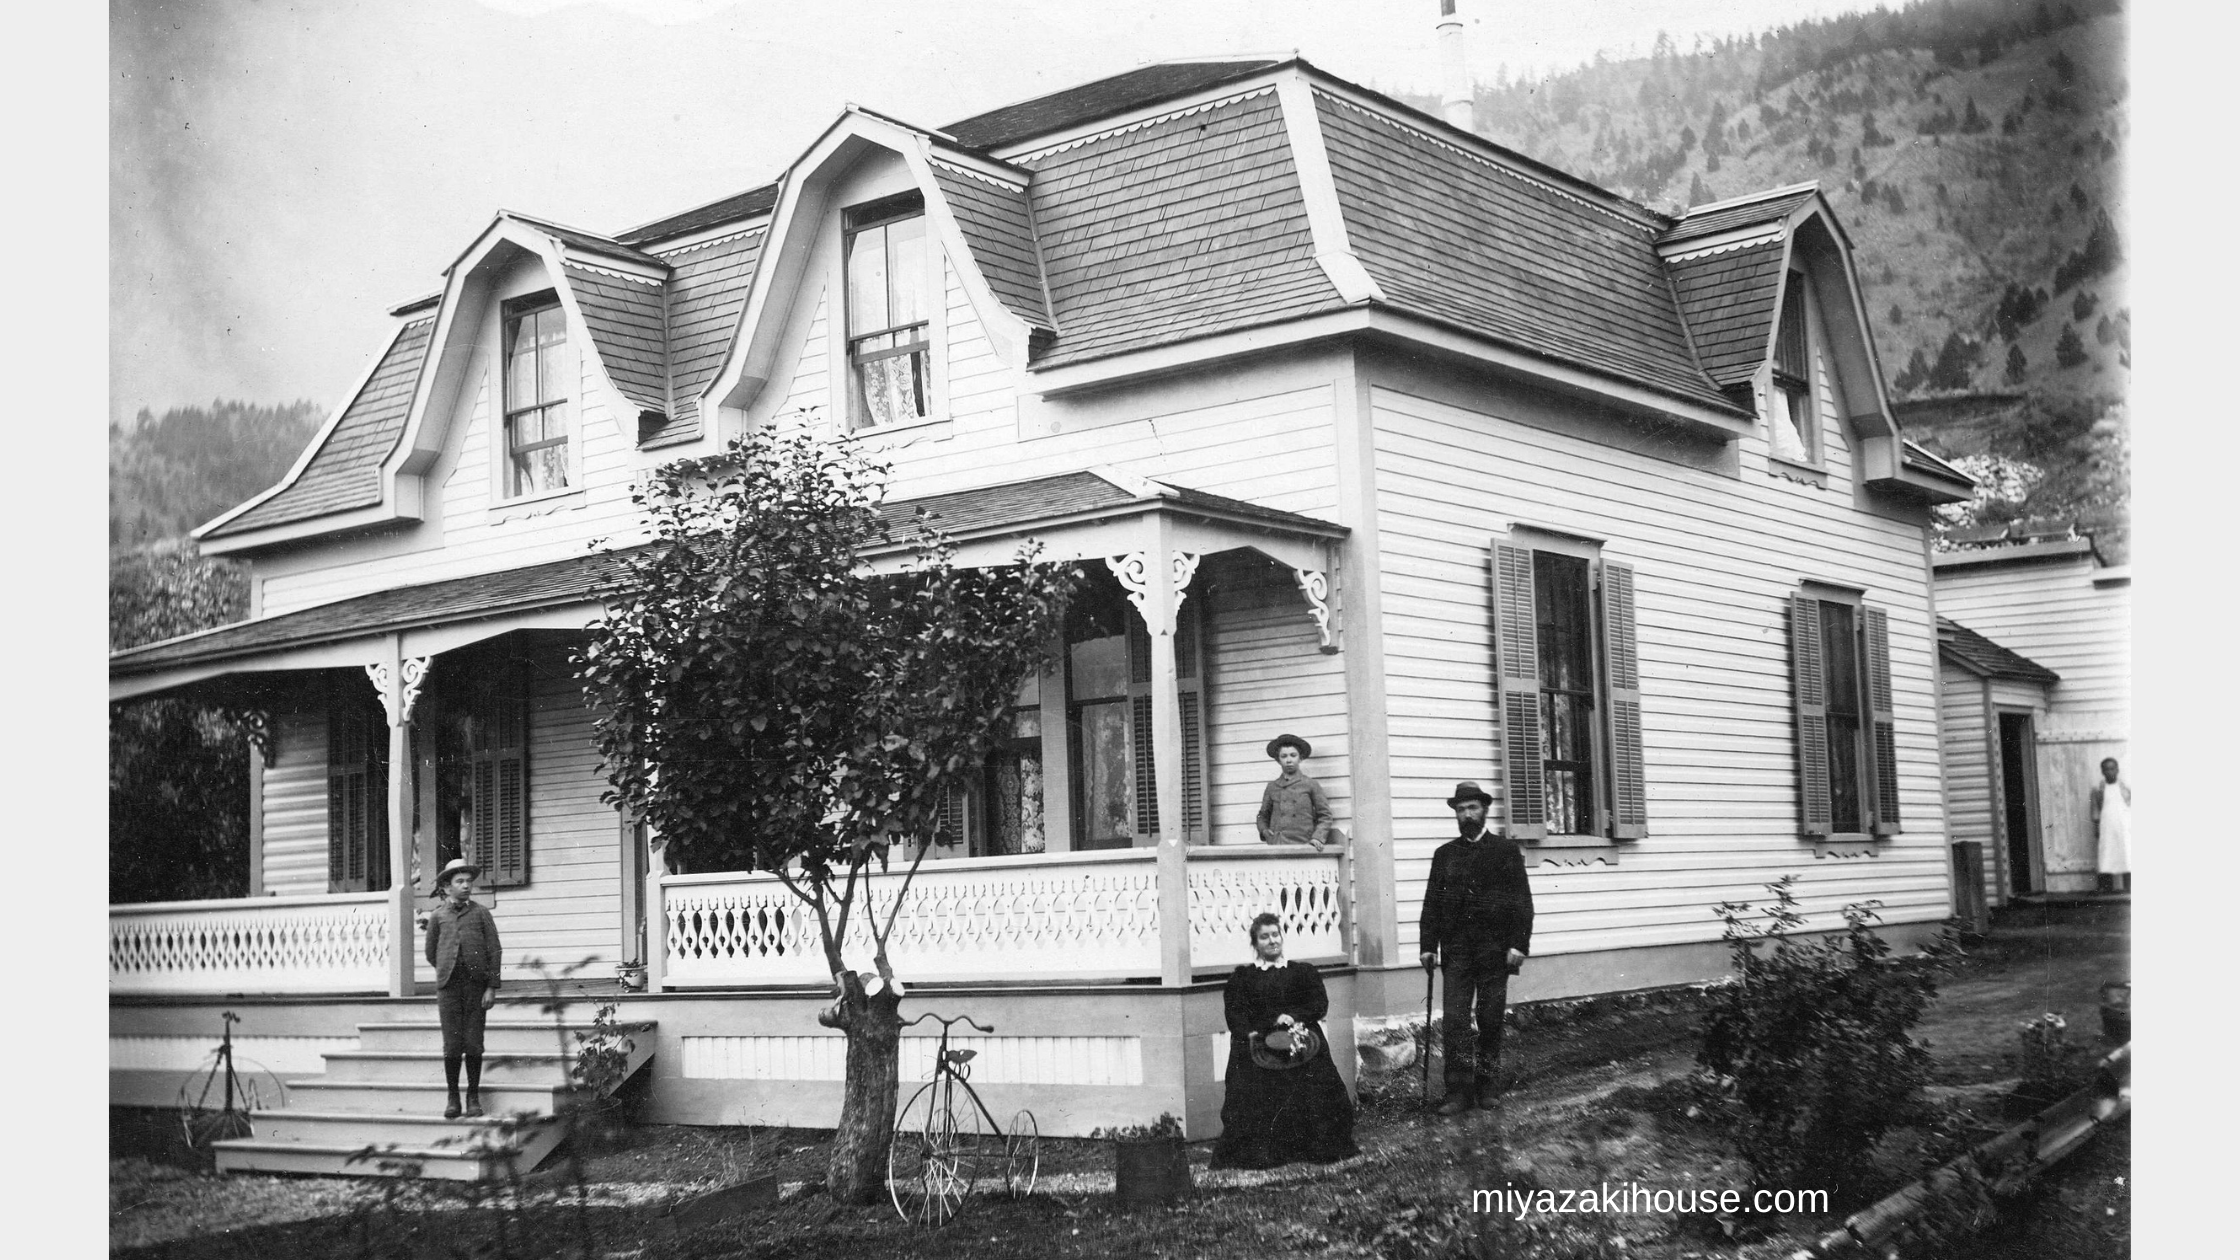 Longford House in Lillooet, BC